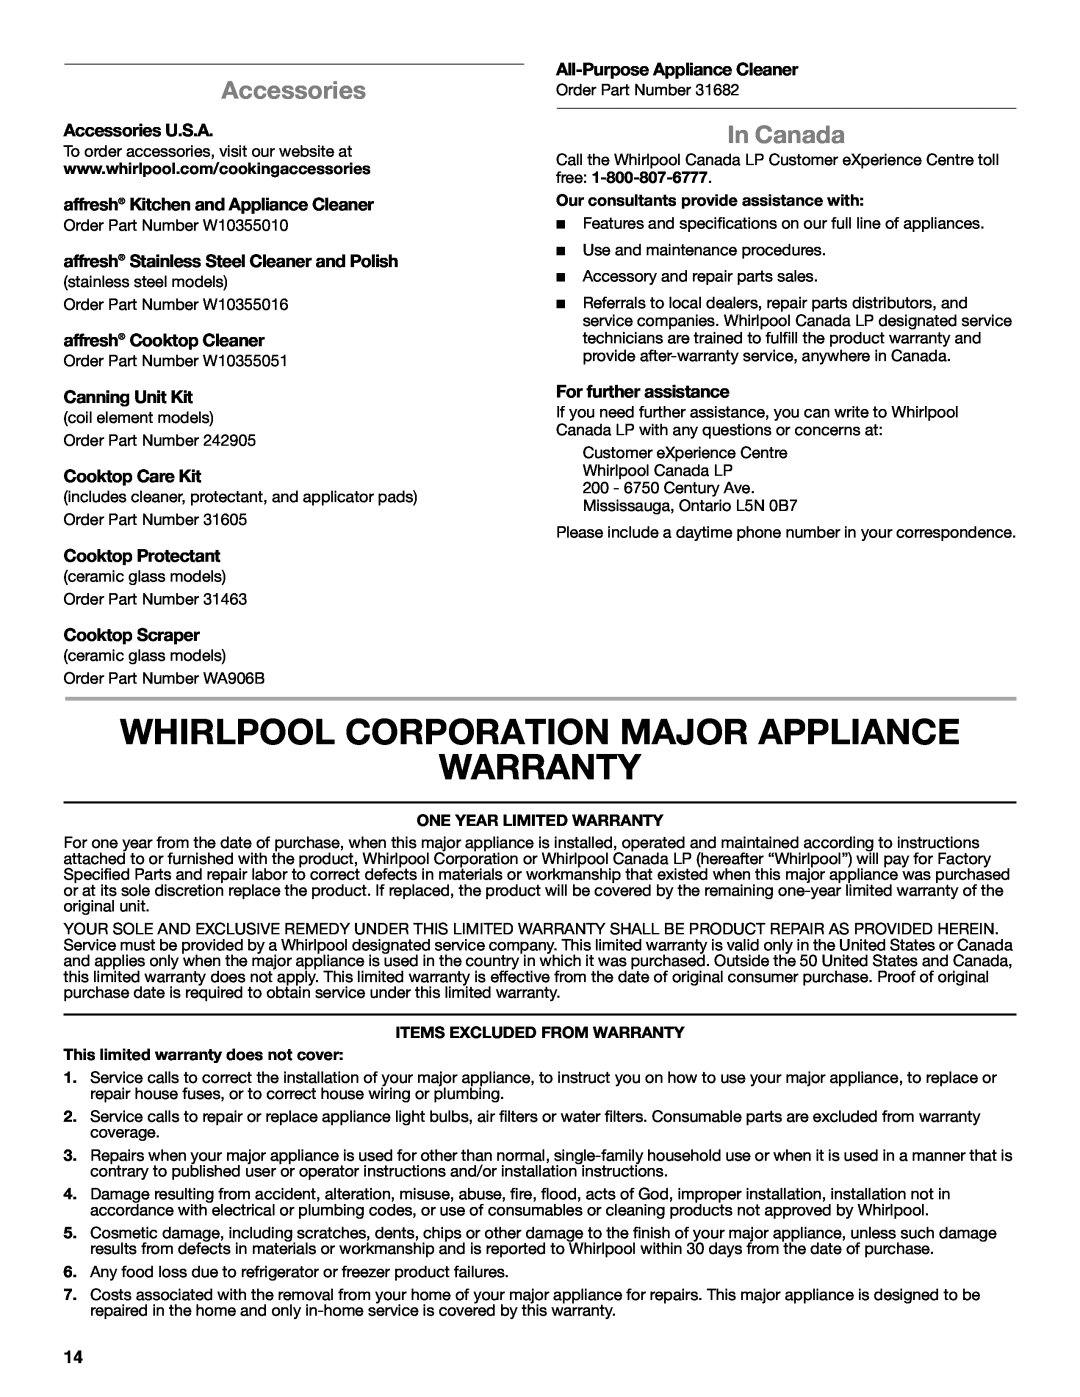 Whirlpool G7CE3055XS Whirlpool Corporation Major Appliance Warranty, In Canada, Accessories U.S.A, Canning Unit Kit 